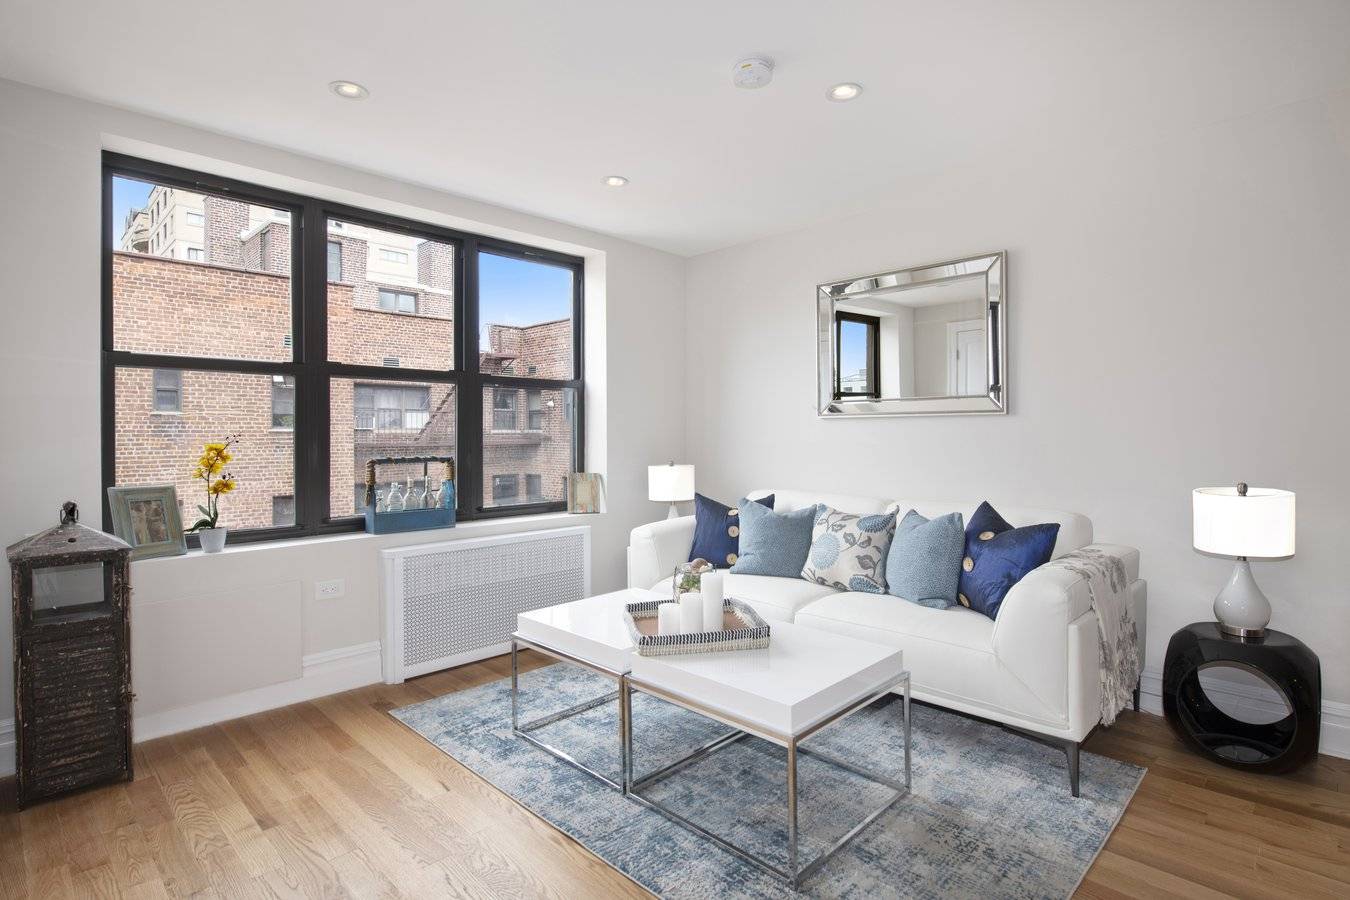 Modern, gut renovated one bedroom, one bath apartment featuring new oak hardwood floors, a spacious living room, large walk in closet or home office, open kitchen with Quartz counter tops, ...